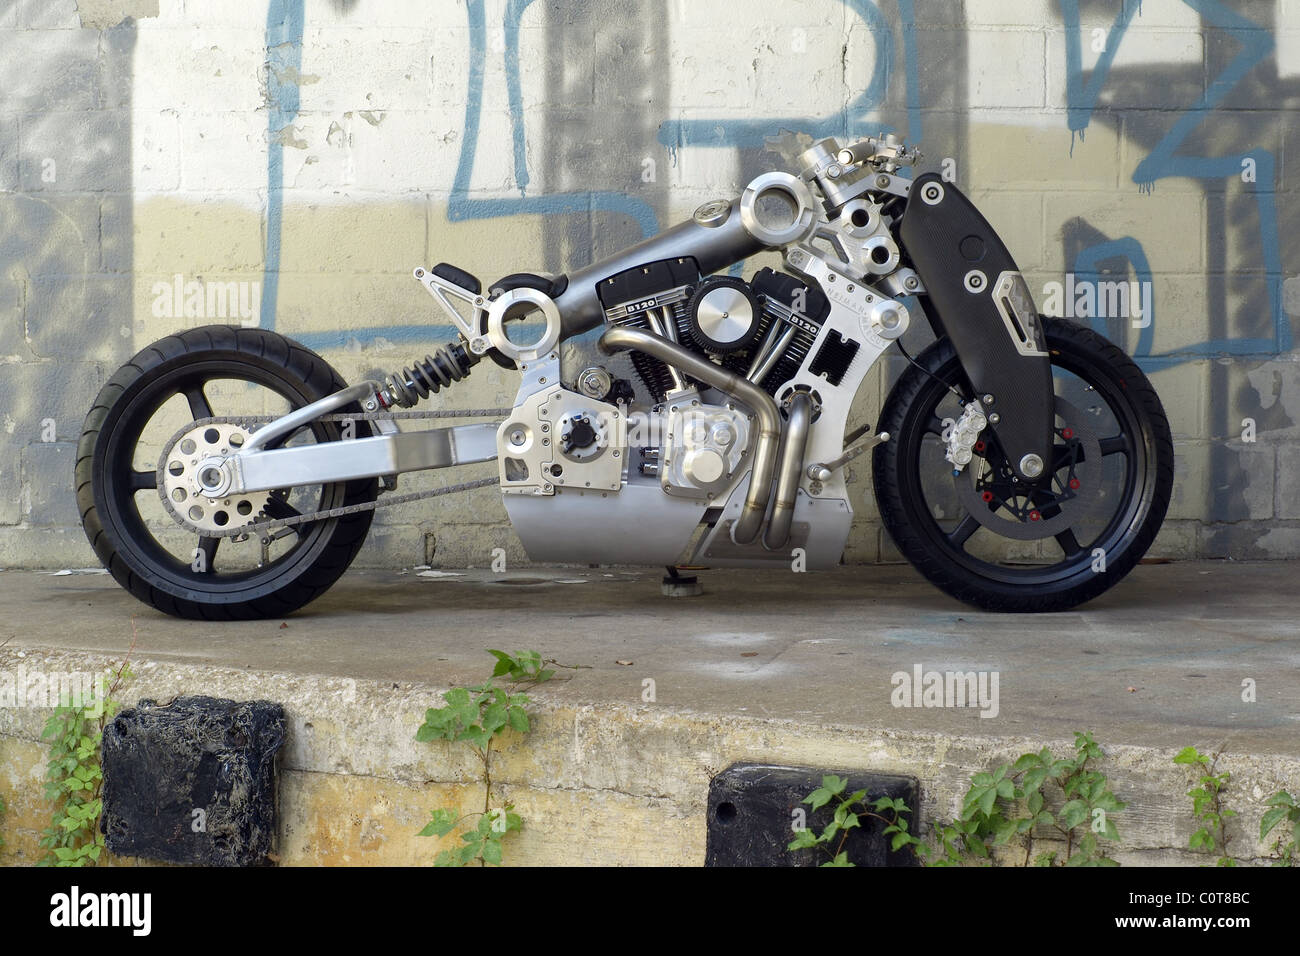 NEIMAN MARCUS LIMITED EDITION FIGHTER THE MOST EXPENSIVE MOTORCYCLE IN THE  WORLD 